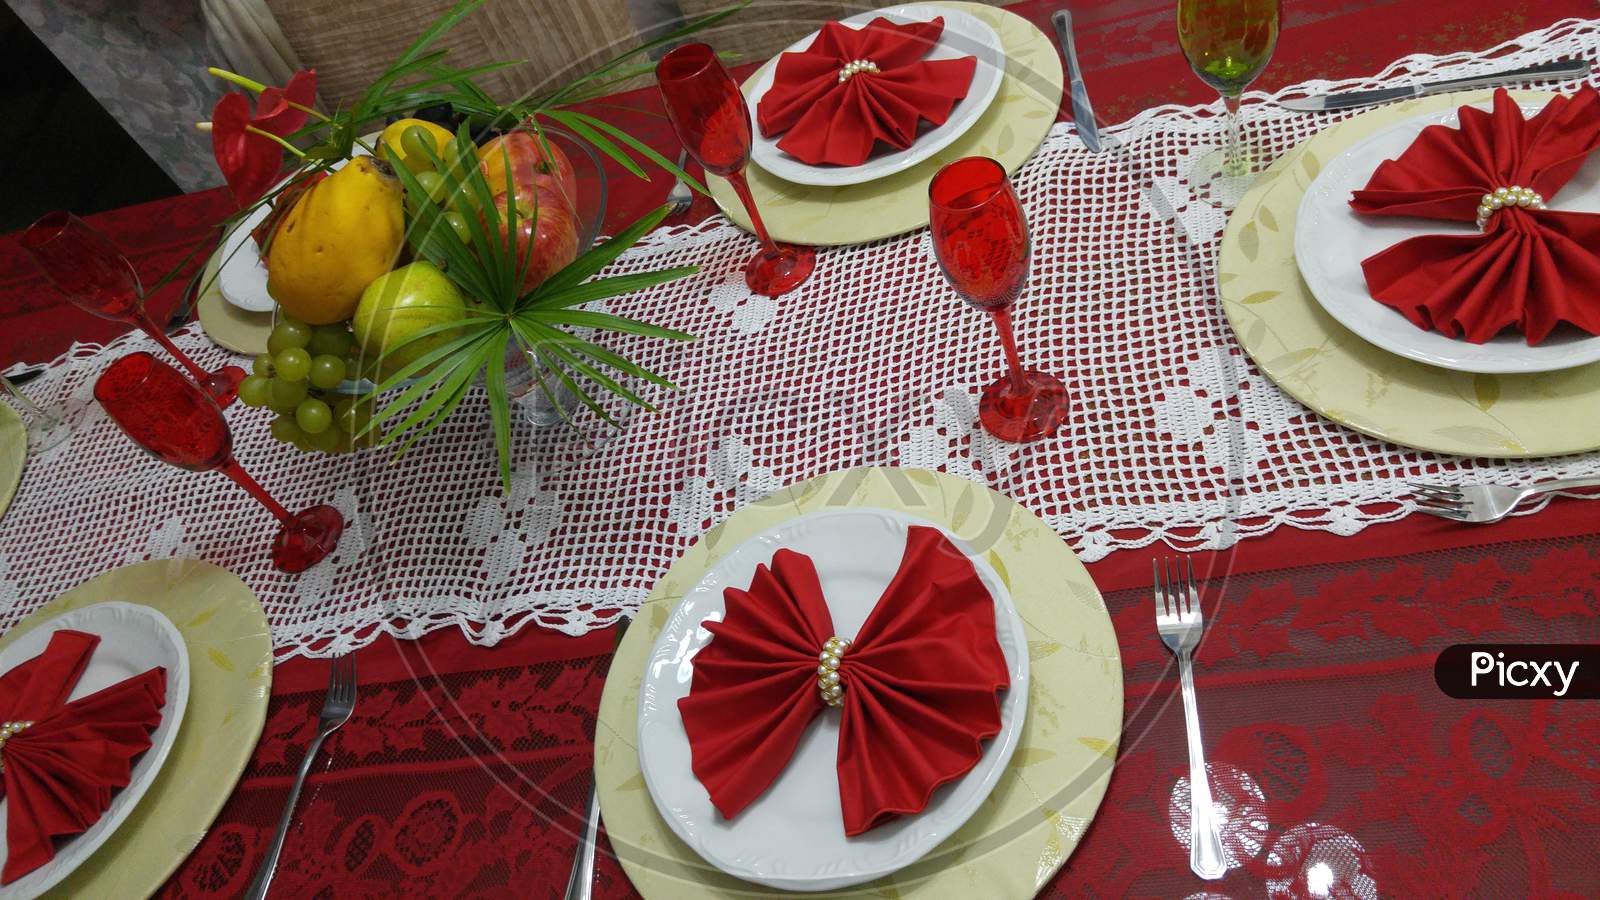 A traditional table for Christmas dinner with decorated dishes and fruits